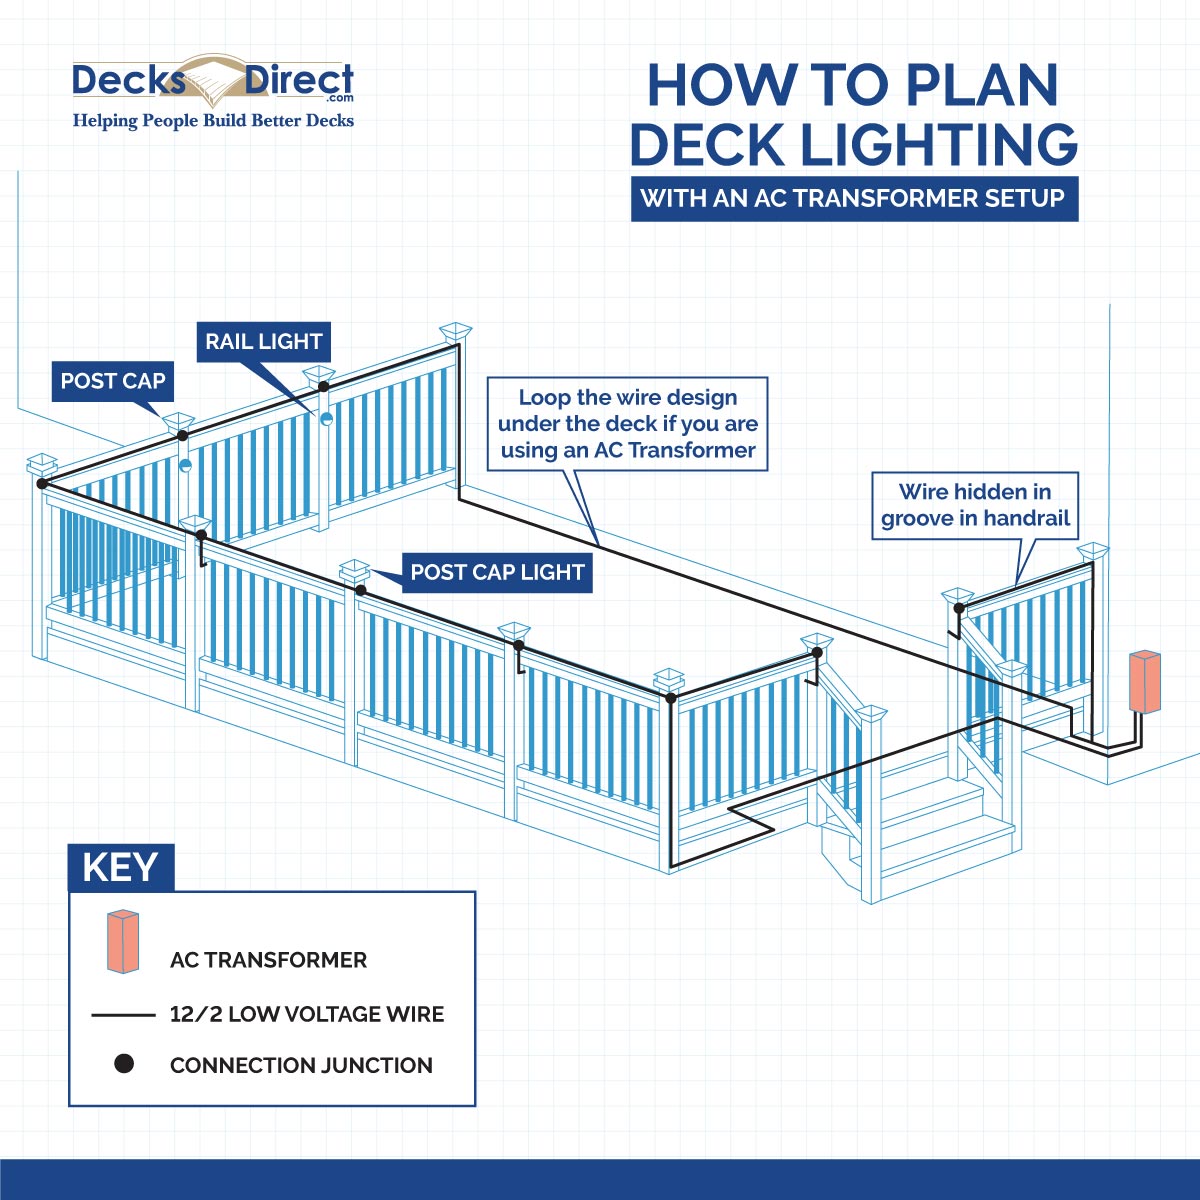 A diagram showing how to wire a deck lighting setup using an AC transformer